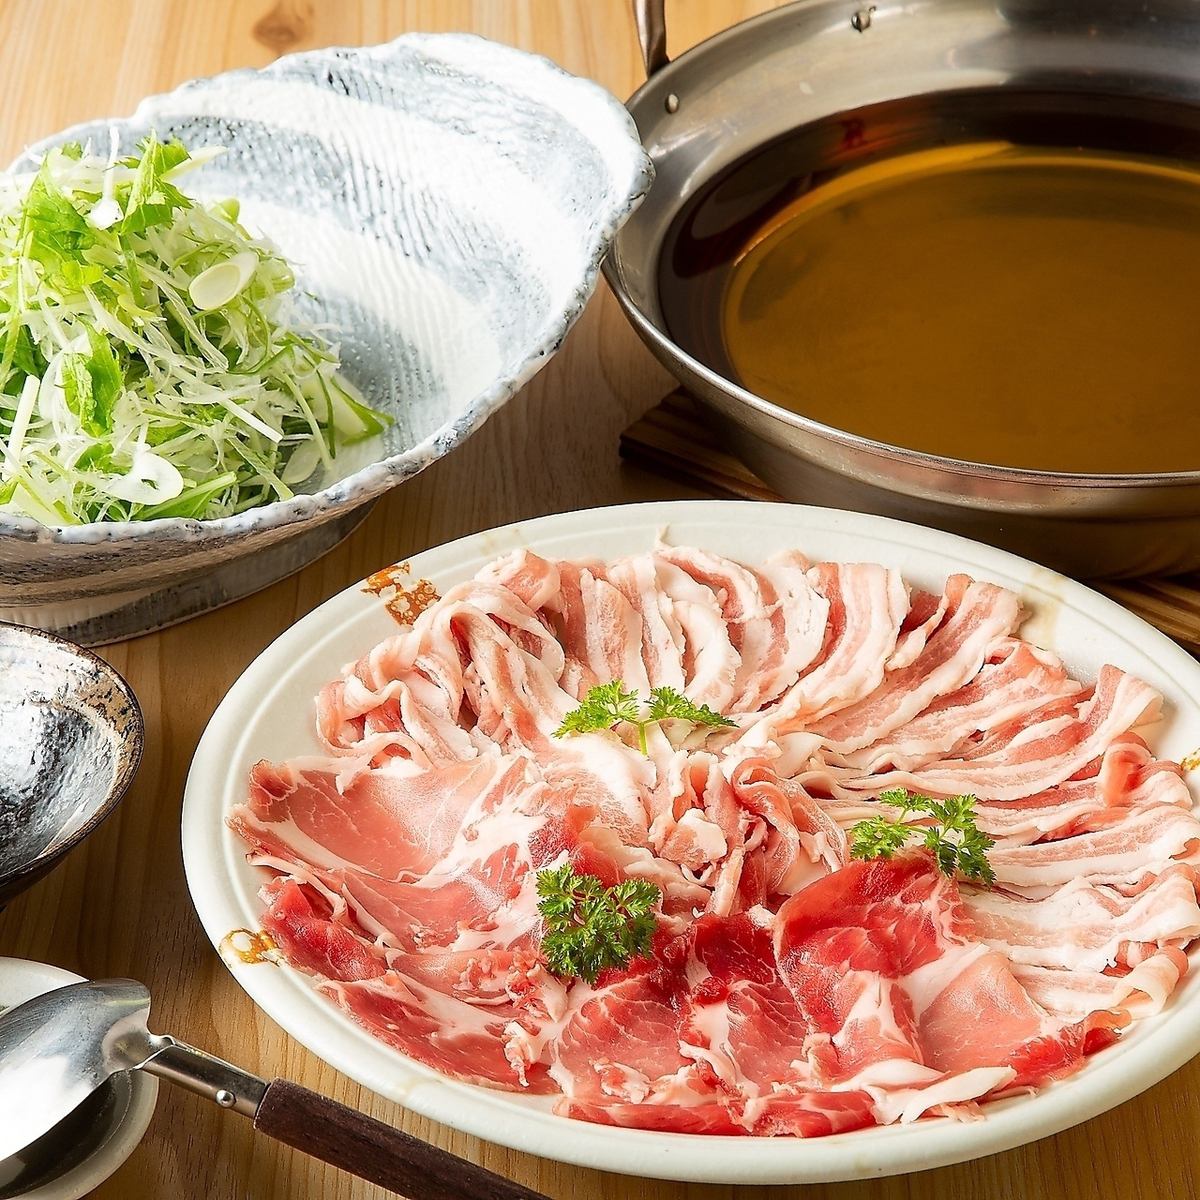 [Private room] All-you-can-eat black pork shabu-shabu plan available! All-you-can-drink included